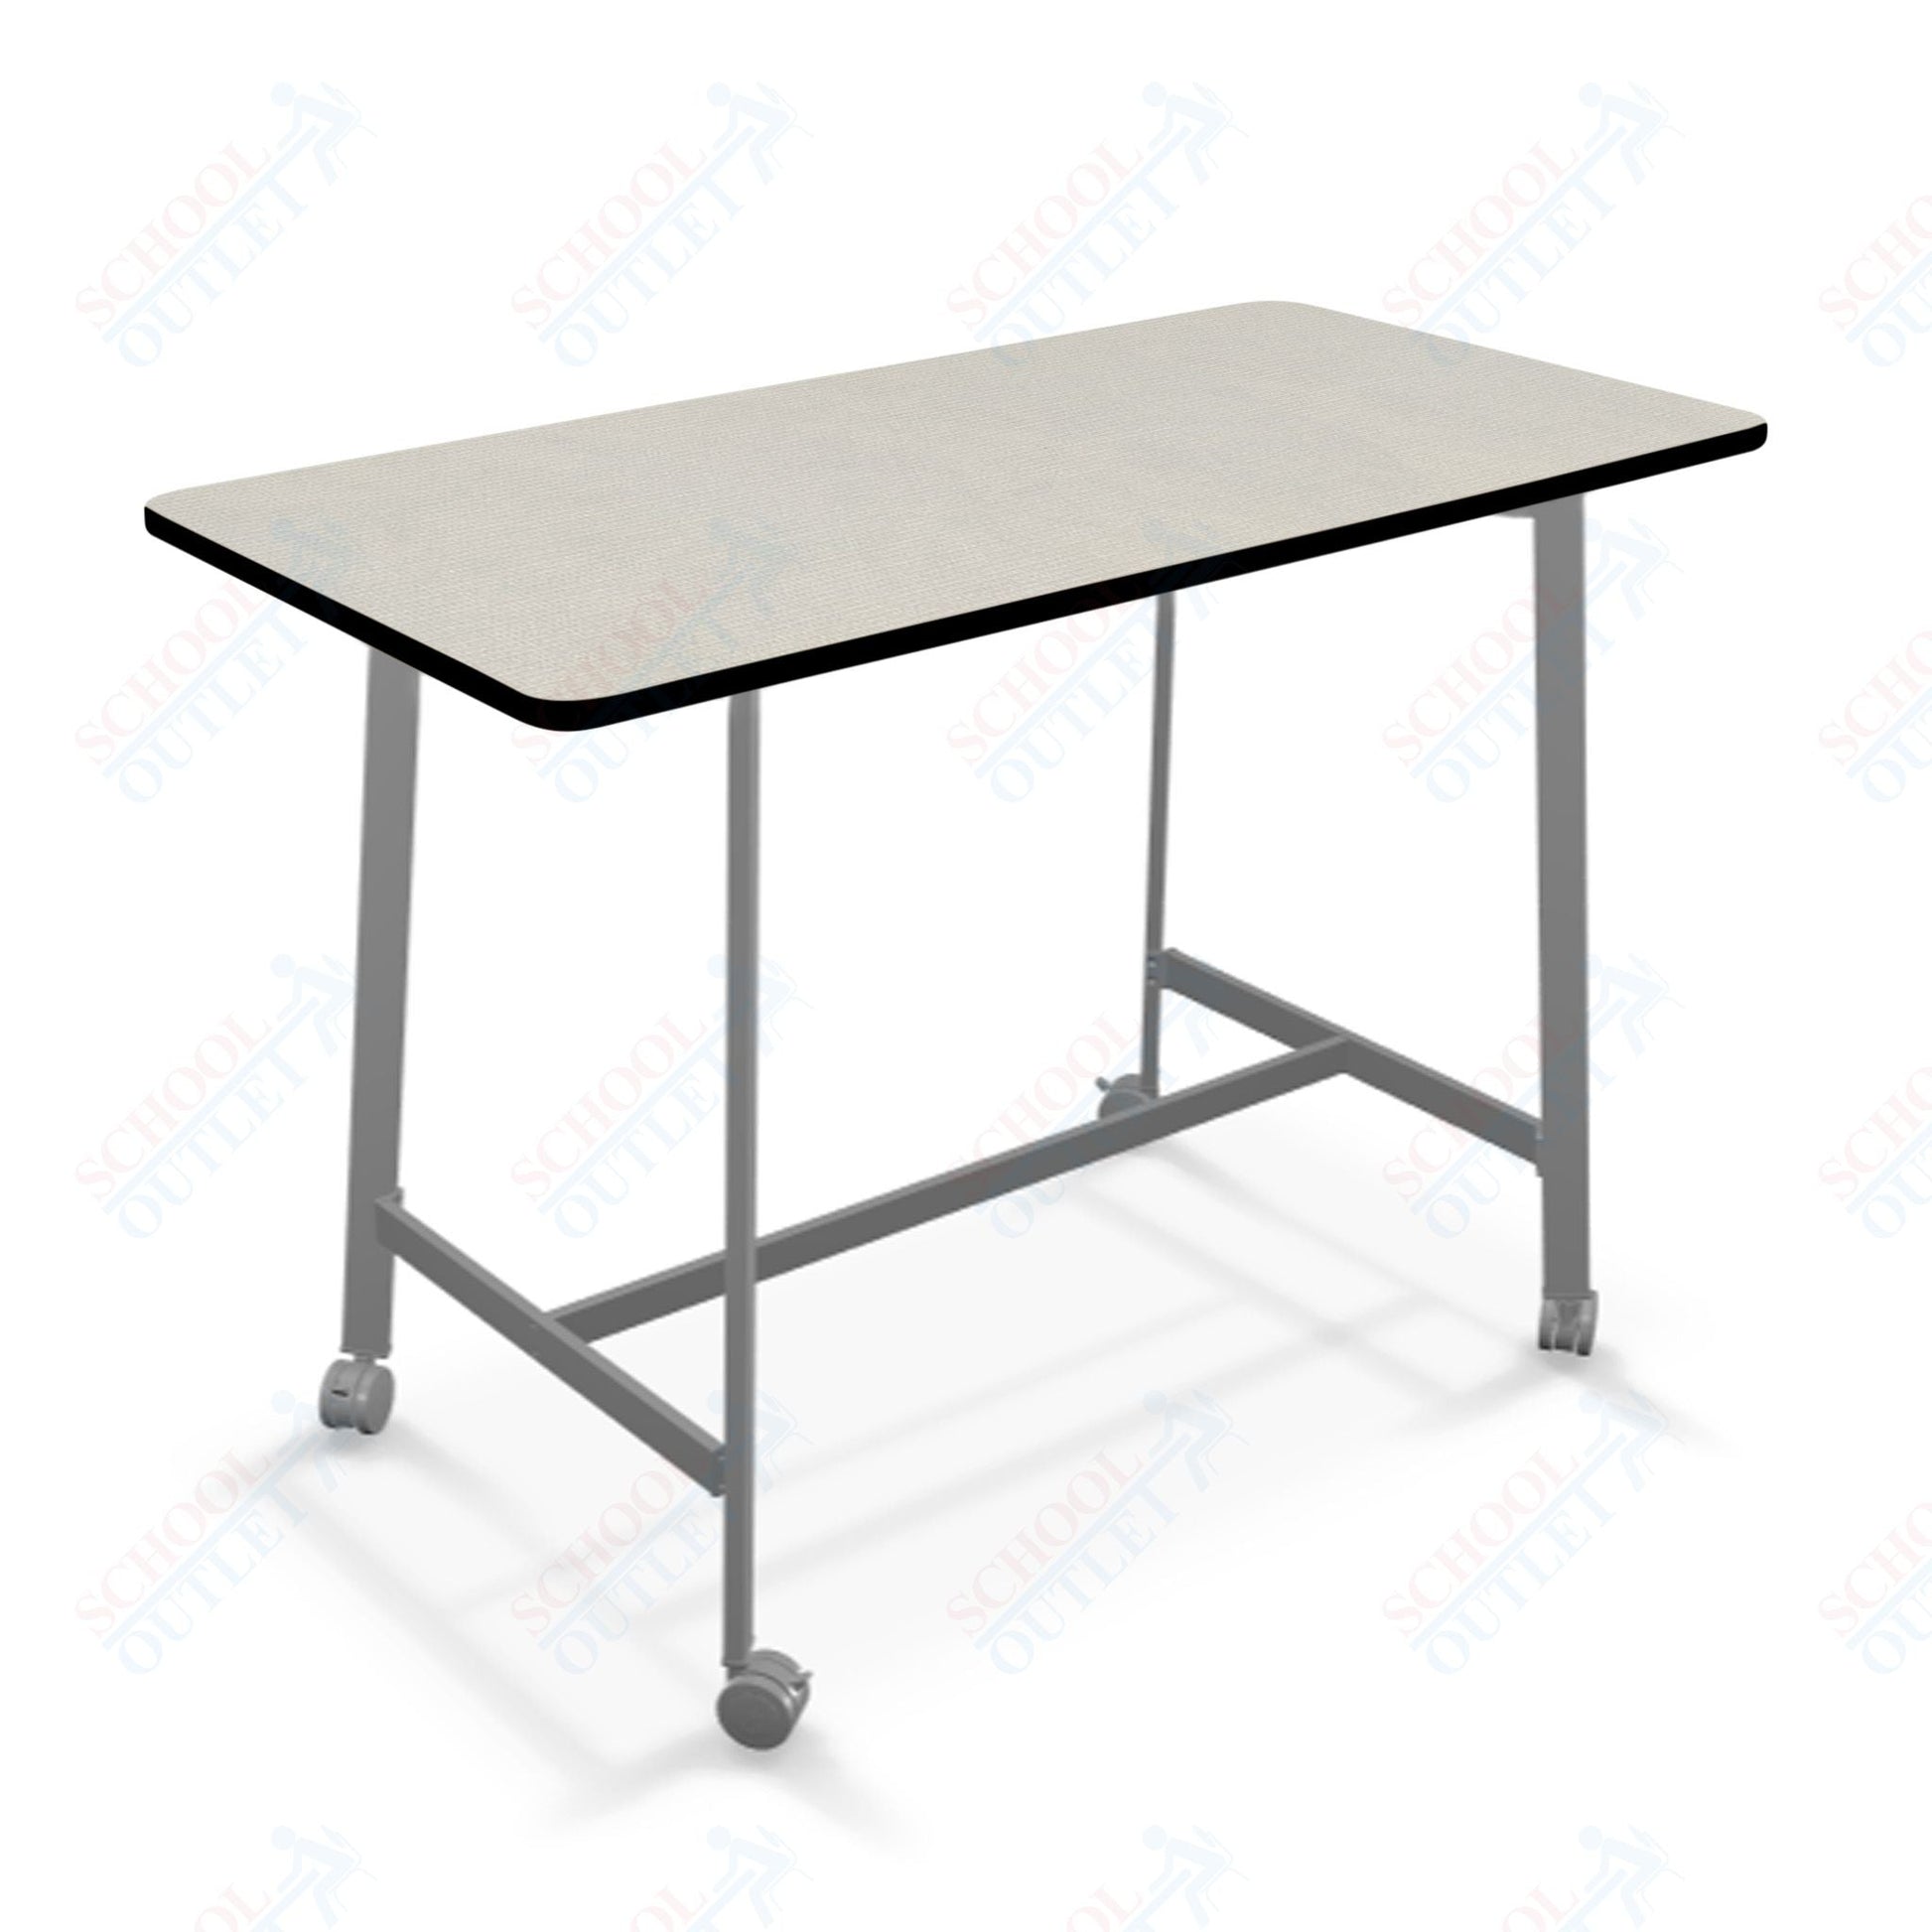 Mooreco Akt Table – 30"D x 60"W Rectangle, Laminate or Butcher Block Top, Fixed Height Available in 29"H, 36"H, or 42"H - SchoolOutlet